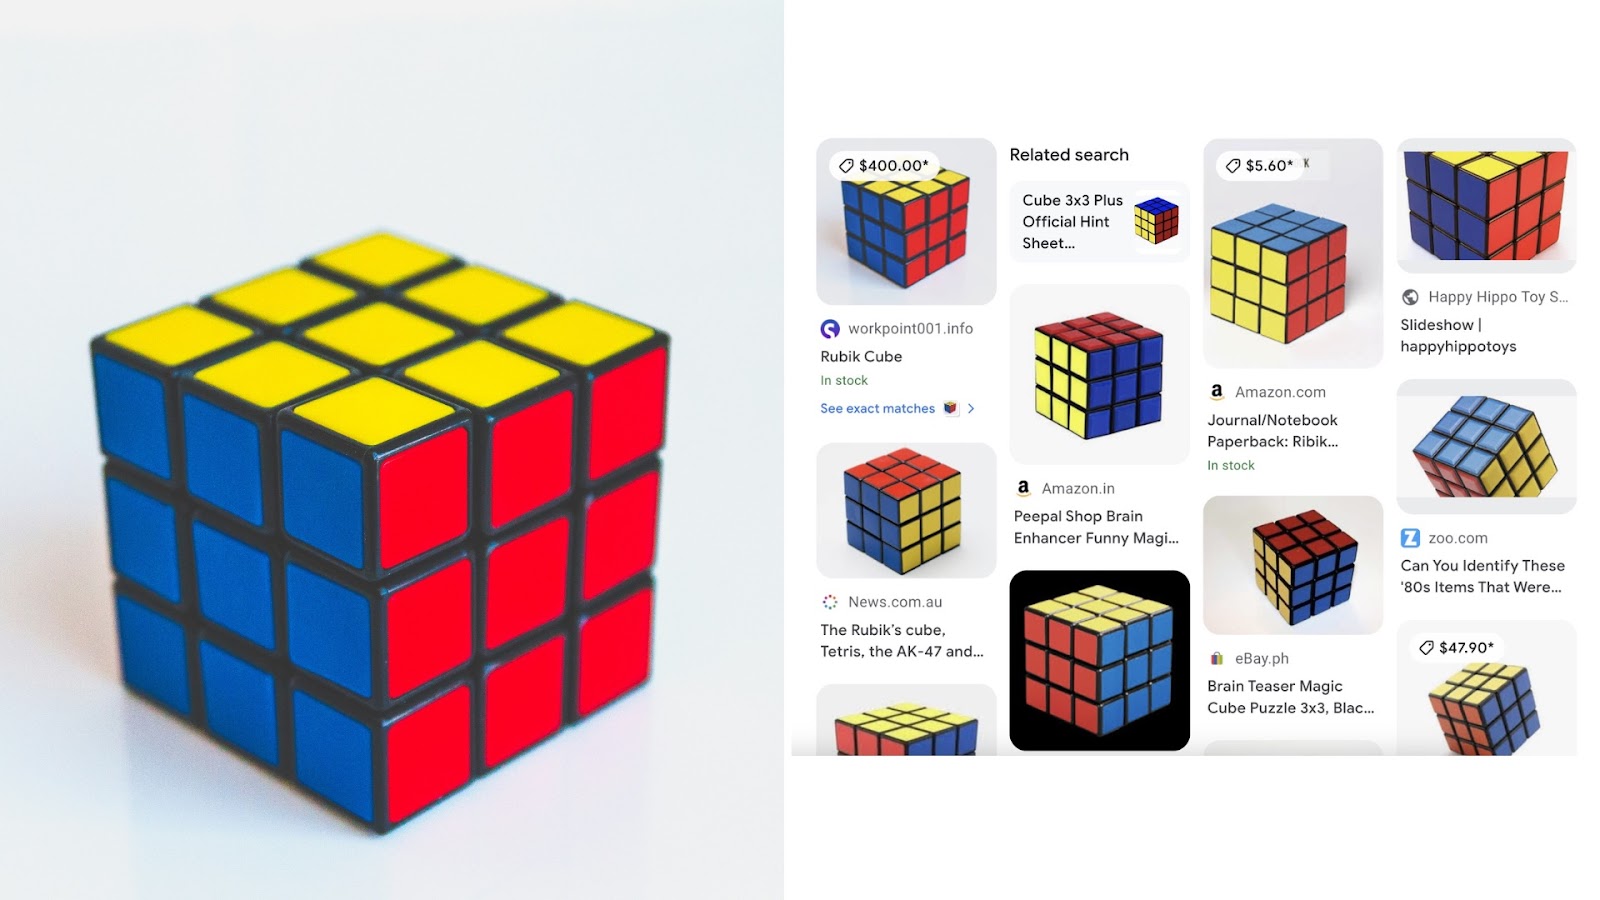 Google reverse representation  hunt  results leafage   for an representation  of a rubik's cube